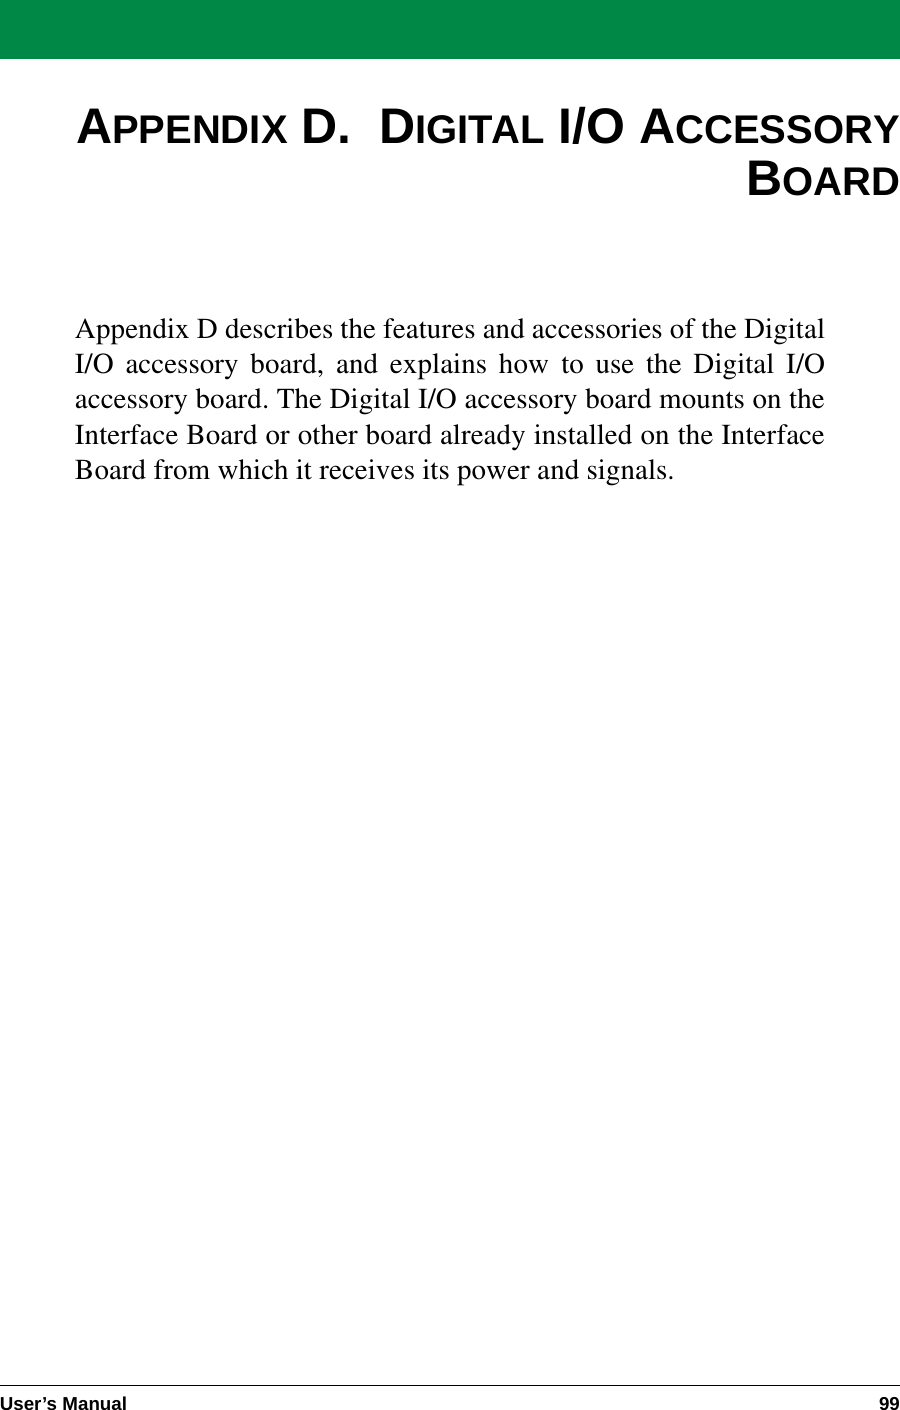 User’s Manual 99APPENDIX D.  DIGITAL I/O ACCESSORYBOARDAppendix D describes the features and accessories of the DigitalI/O accessory board, and explains how to use the Digital I/Oaccessory board. The Digital I/O accessory board mounts on theInterface Board or other board already installed on the InterfaceBoard from which it receives its power and signals.